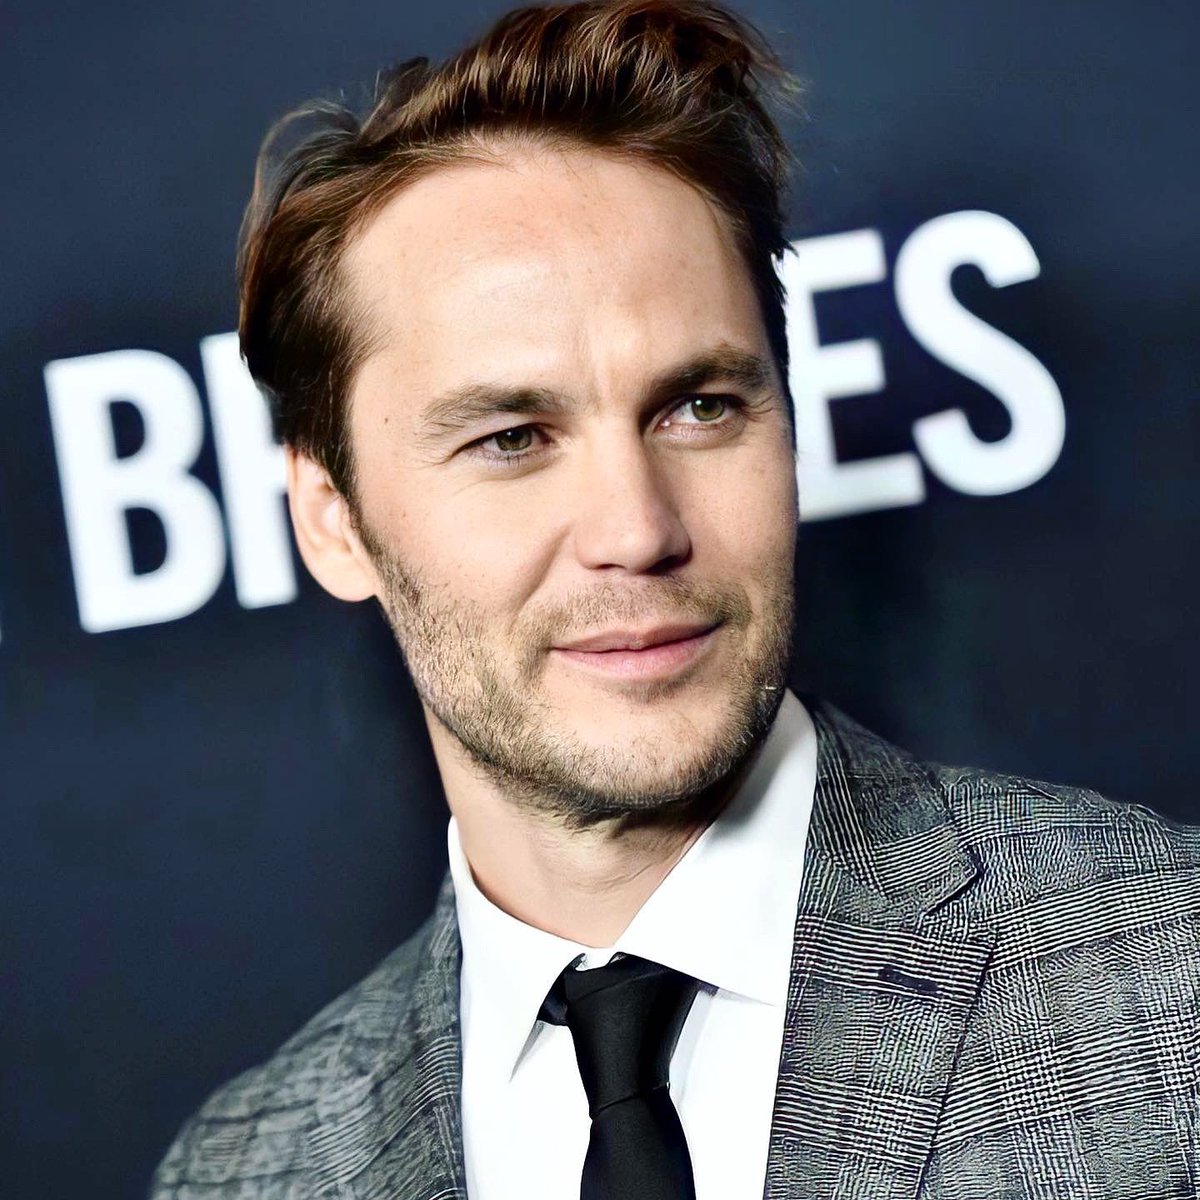 Two years ago today, 21 Bridges premiered. #taylorkitsch #21bridges #ray